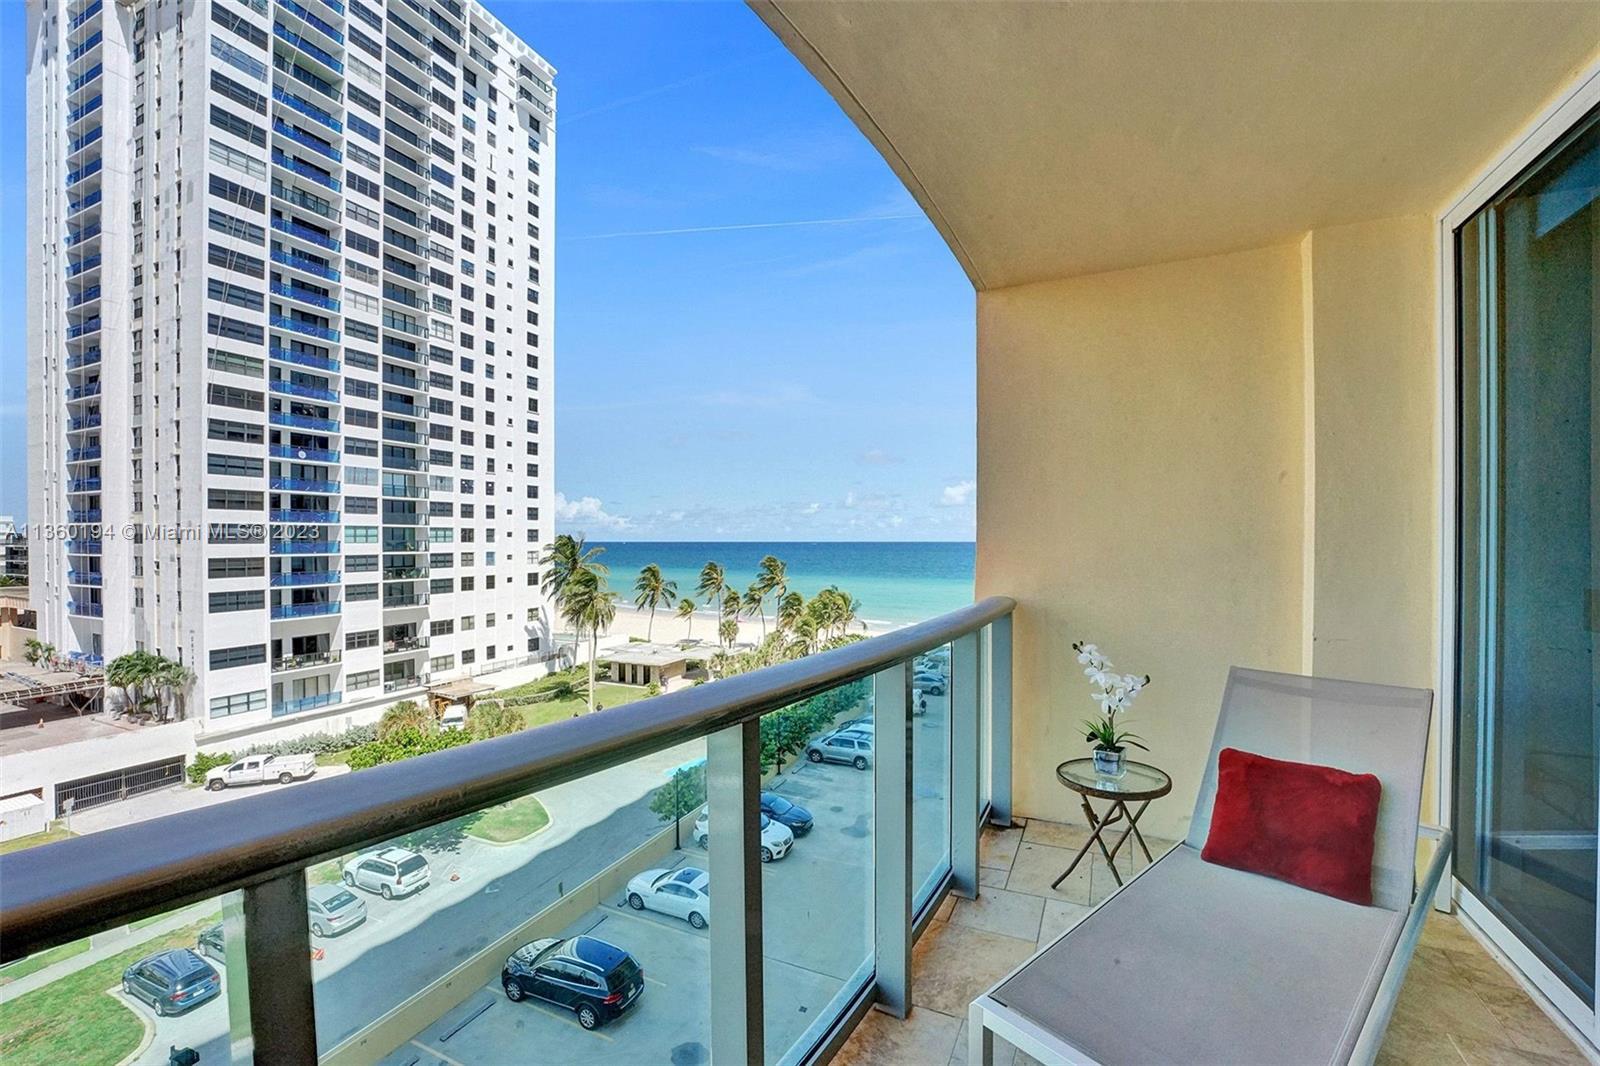 Enjoy ocean views from this 1 bedroom condo on the Beach. Tile floors t, fully furnished and equippe